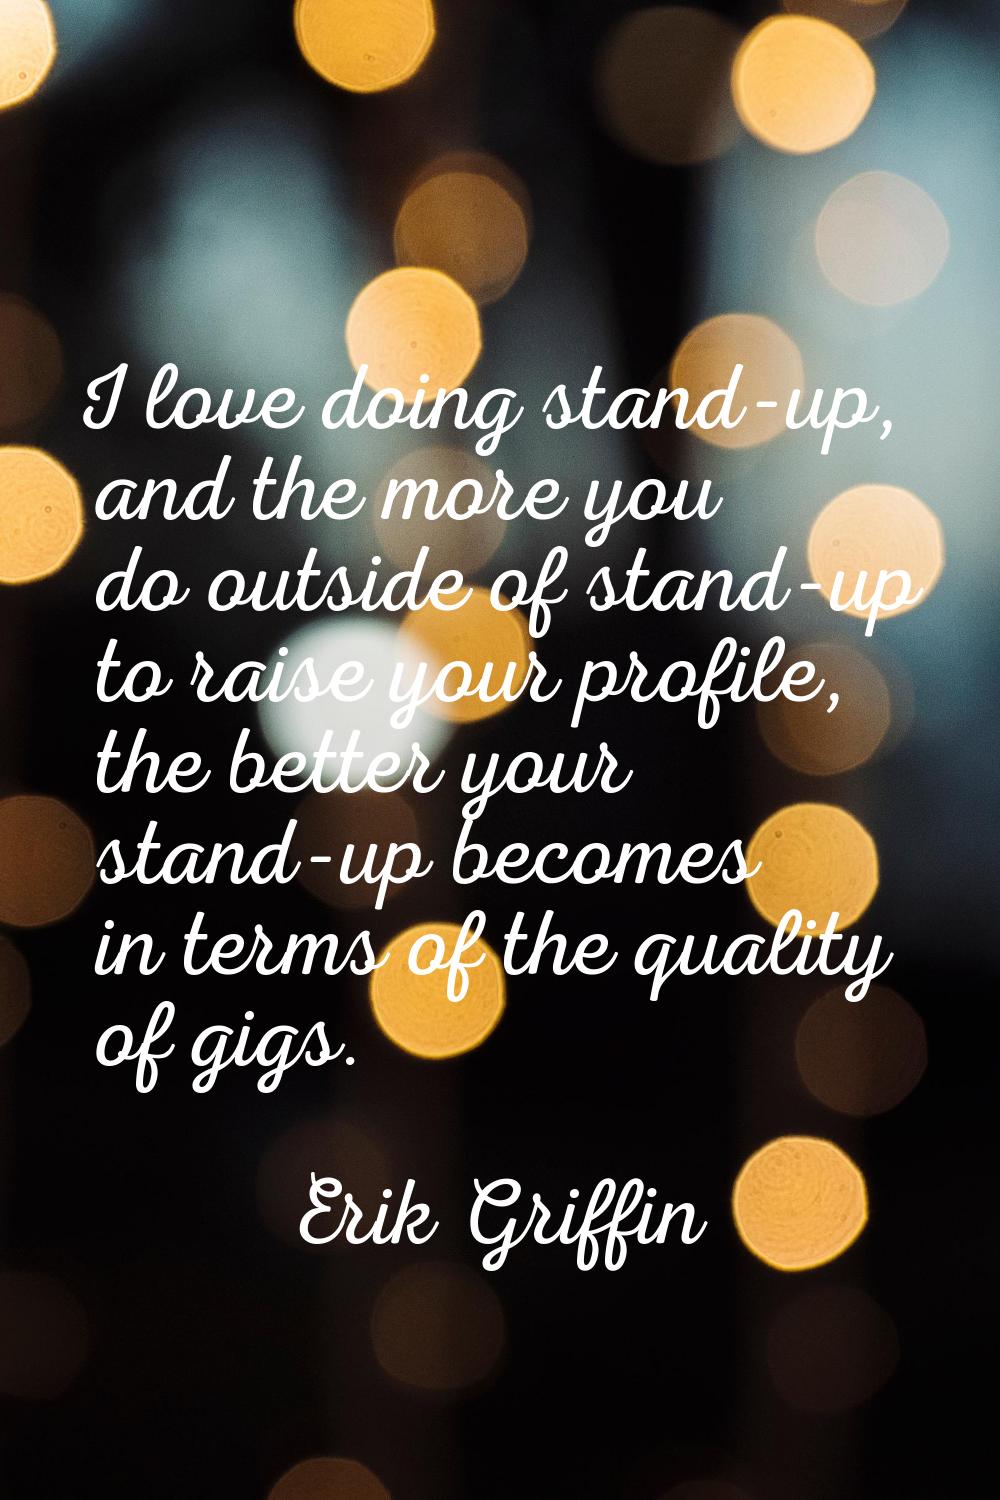 I love doing stand-up, and the more you do outside of stand-up to raise your profile, the better yo